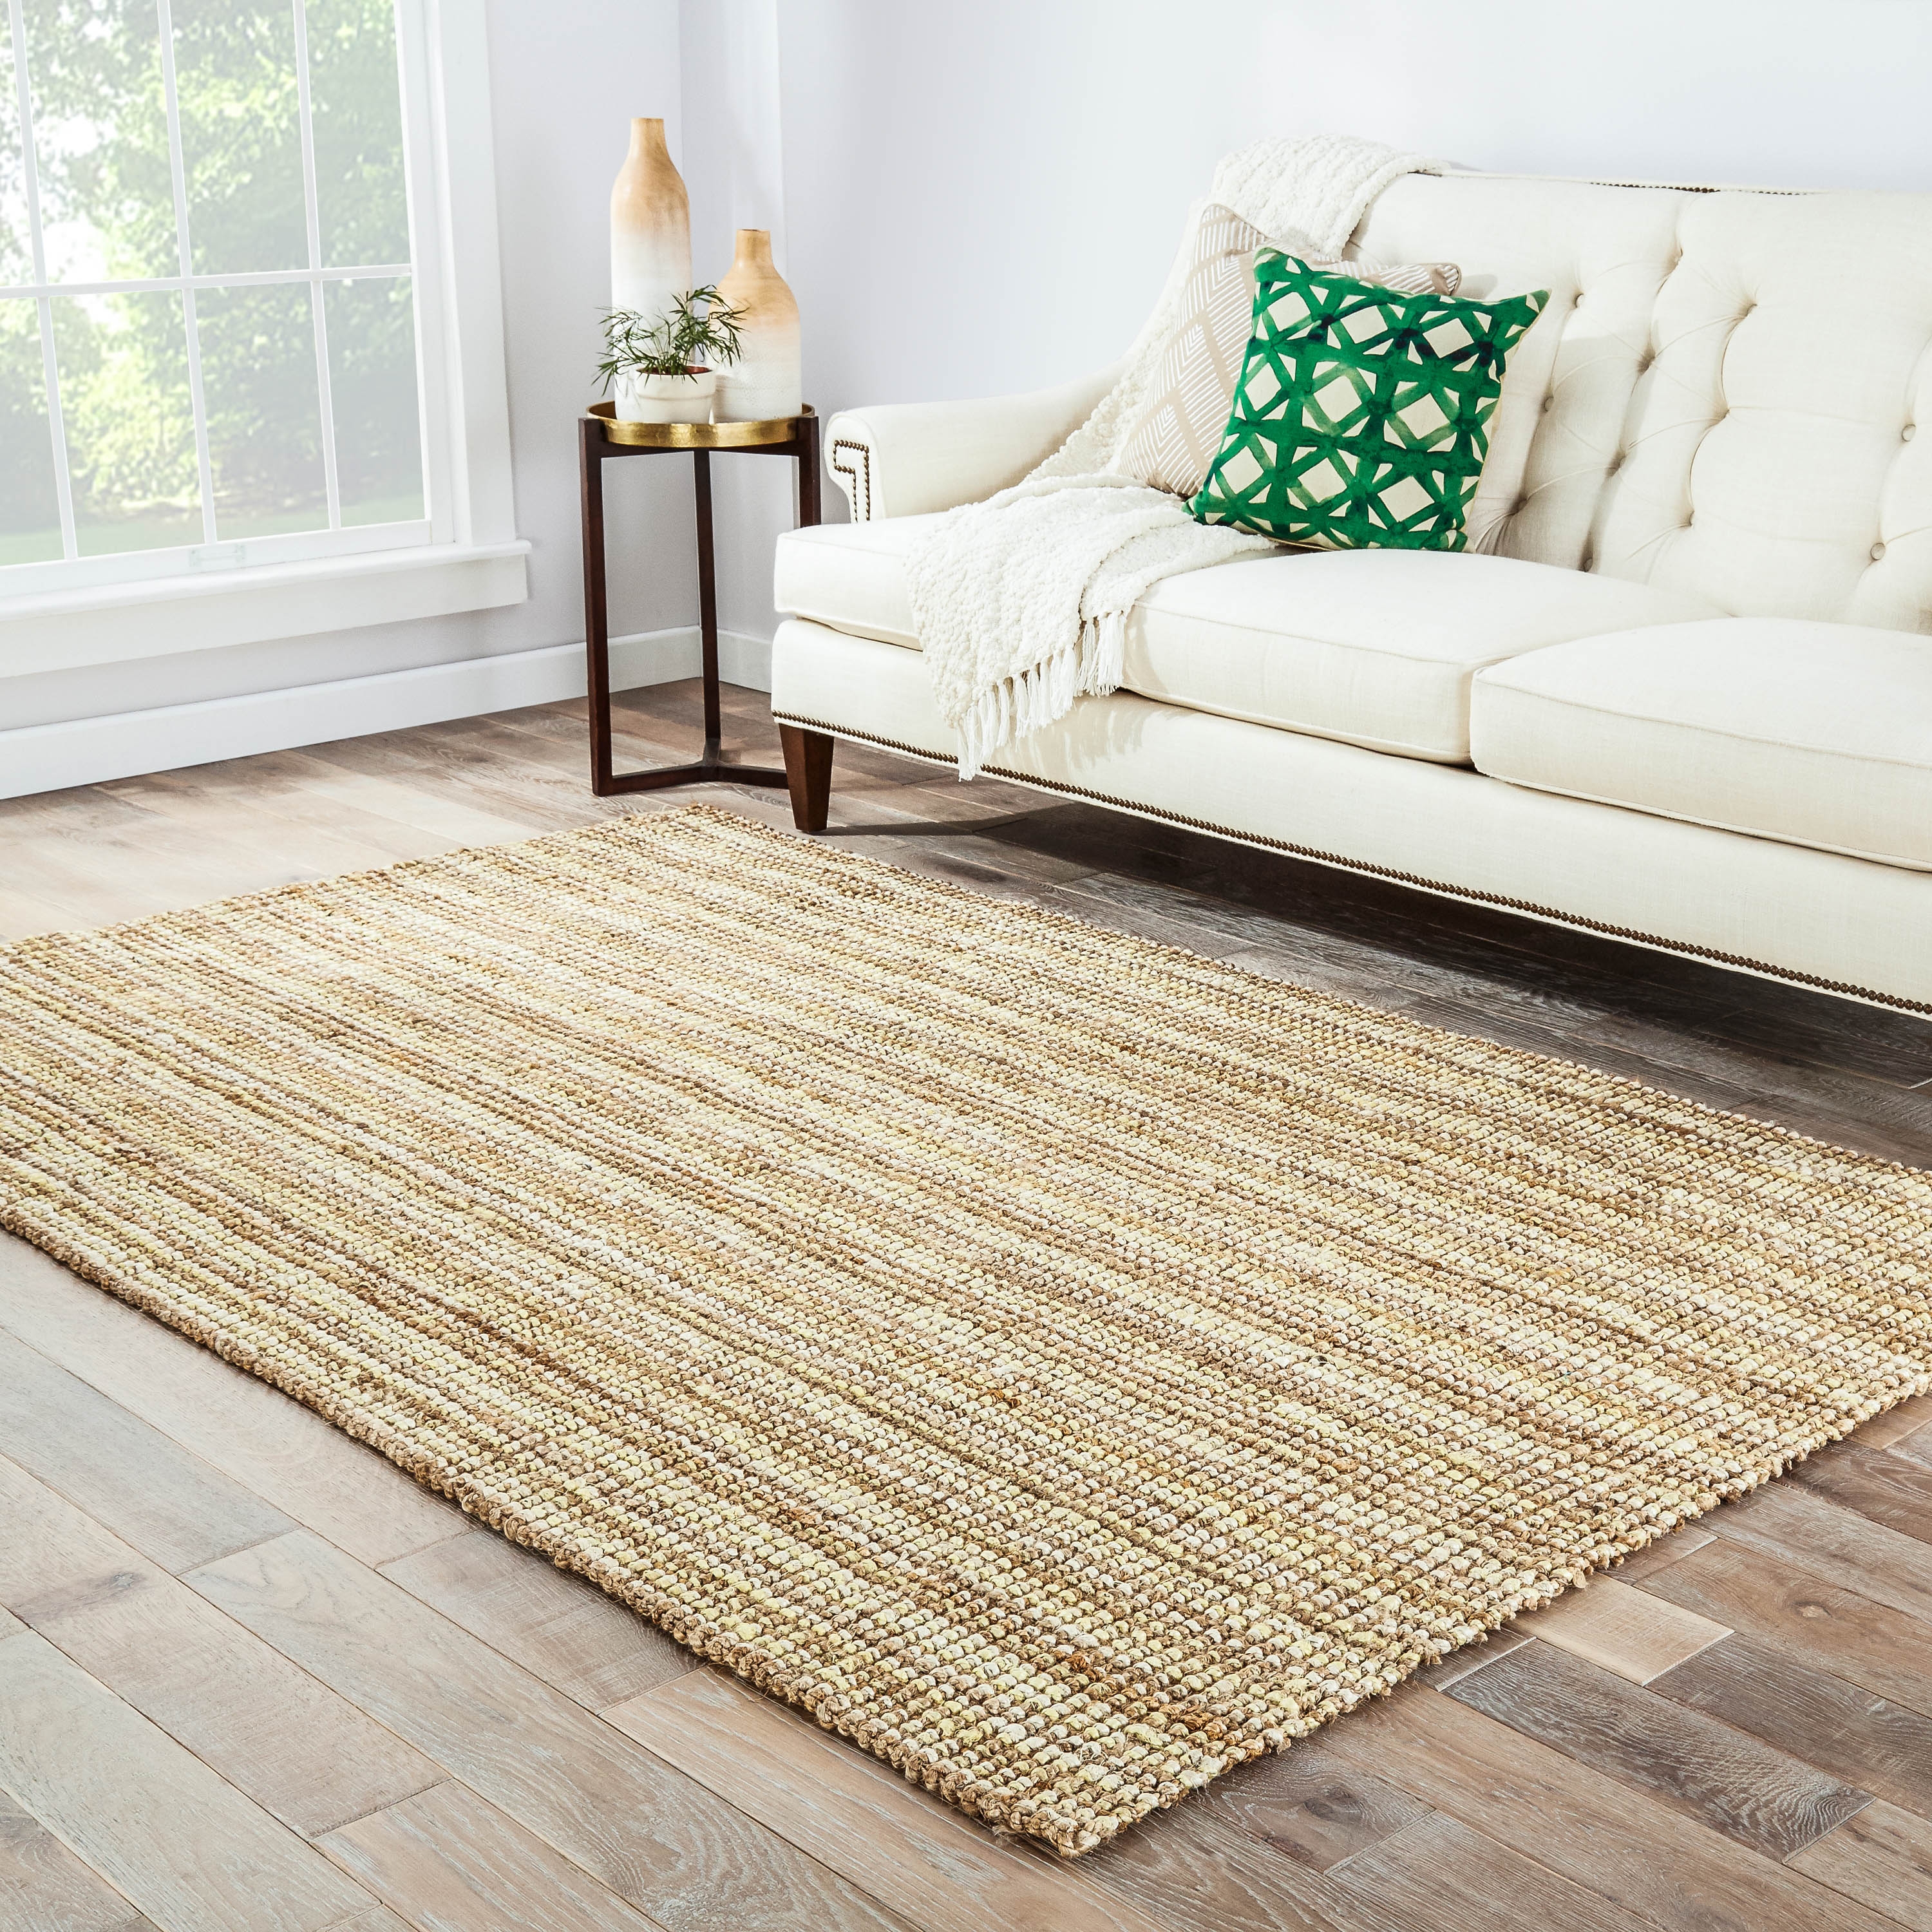 Marvy Natural Solid Beige/ White Area Rug (8' X 10') - Image 4